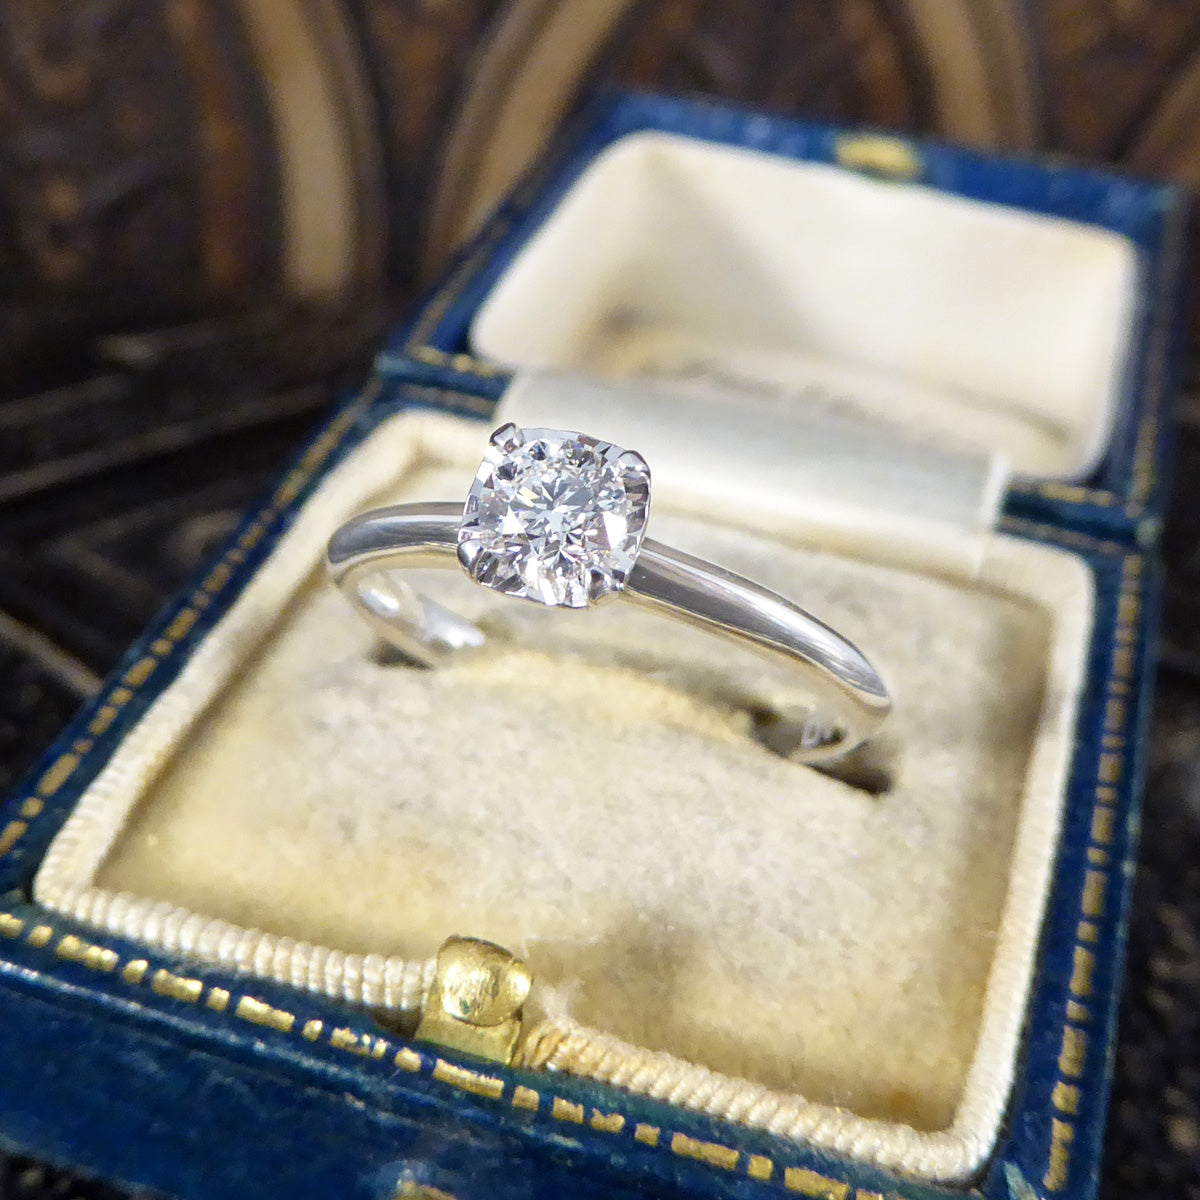 Diamond Solitaire Ring with a Cushion Cut Illusion in White Gold